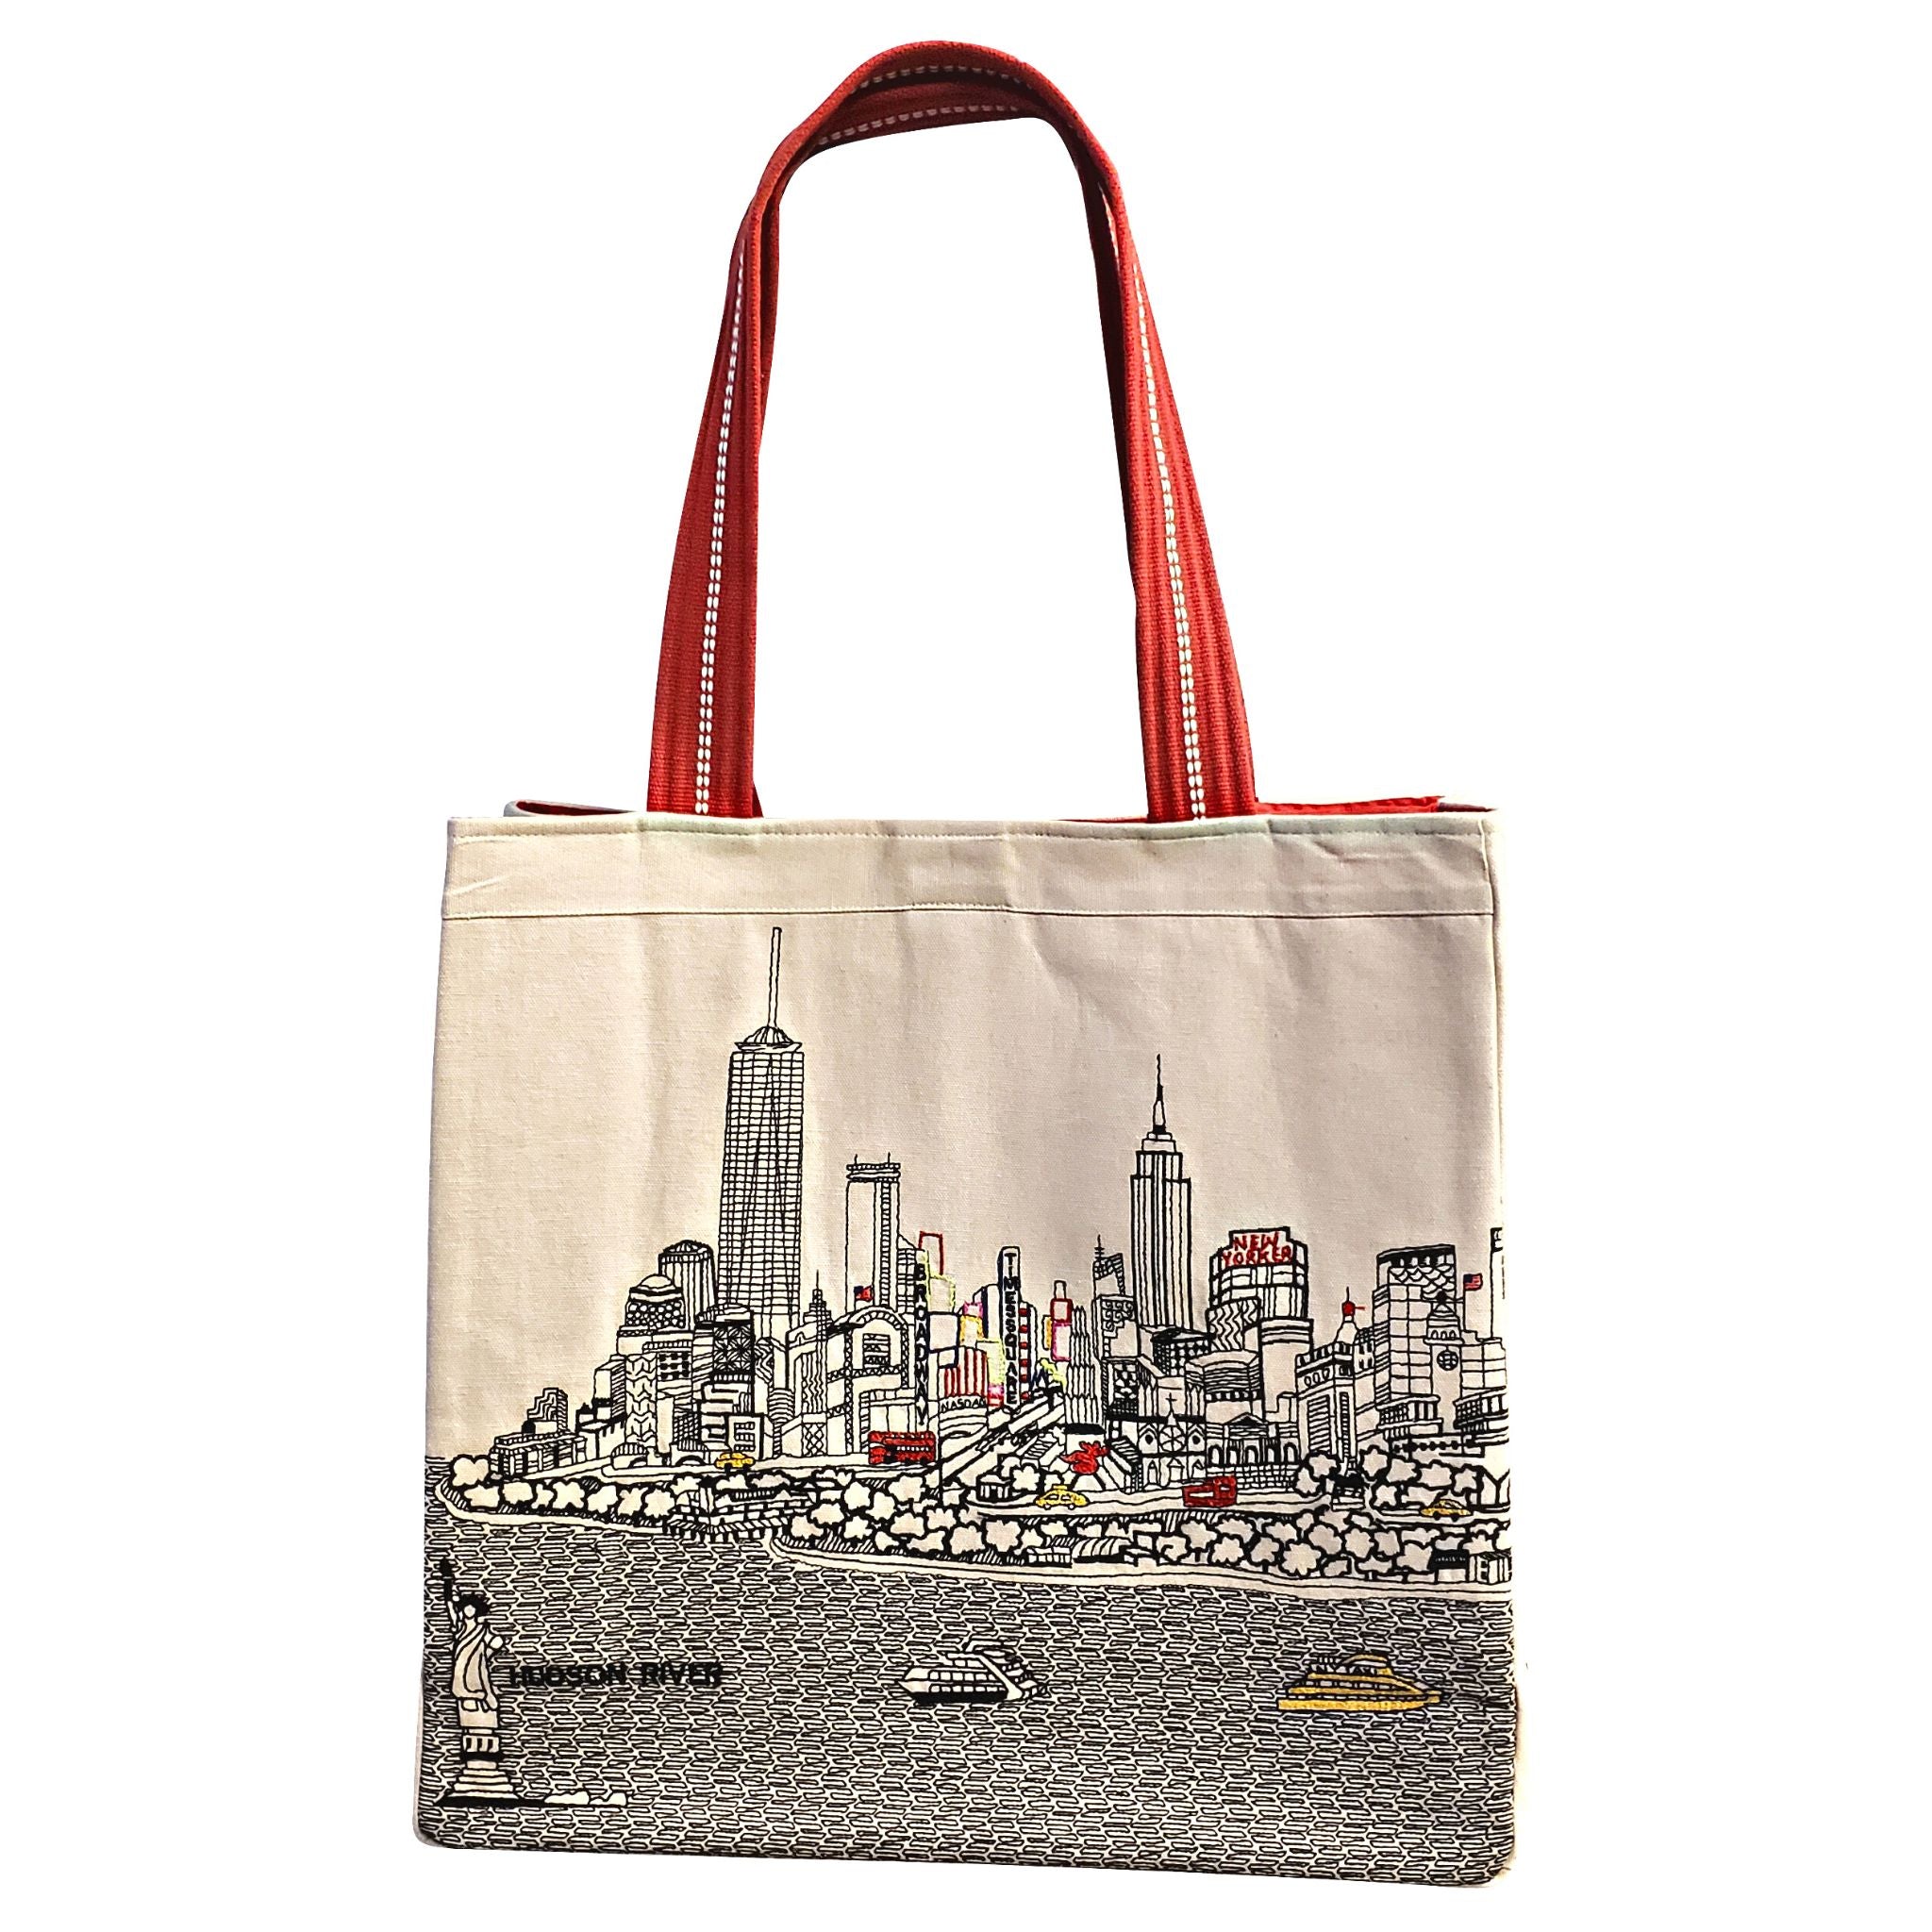 Nolita Tote, Large Leather Tote Bag, Large Laptop Tote, Shoulder Bag, Custom Made by Hand in NYC, Hand Stitched